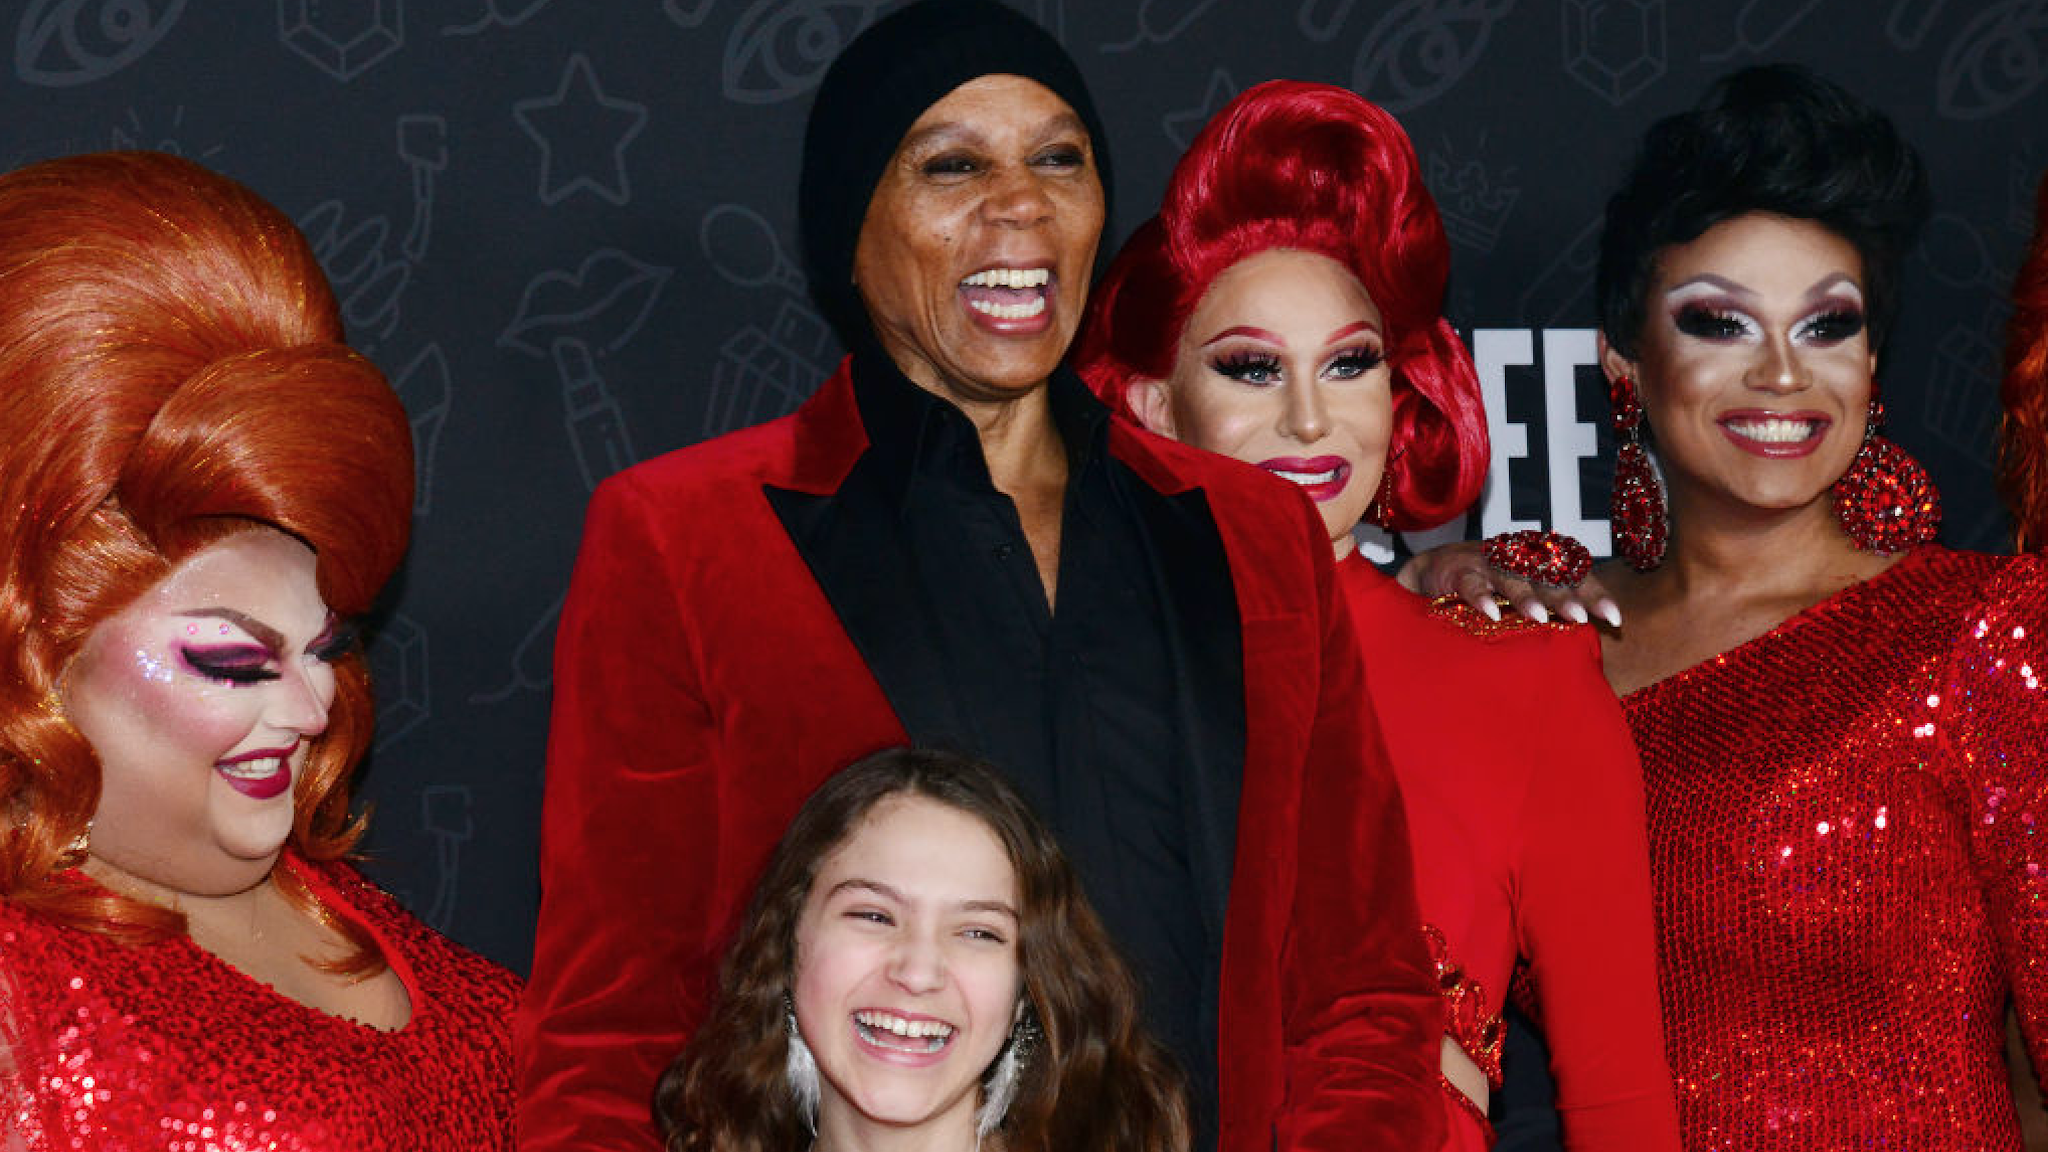 (L-R) Ginger Minj, Izzy G., RuPaul, Trinity "The Tuck" Taylor and Mariah Paris Balenciaga attend the premiere of Netflix's "AJ and the Queen" Season 1 at the Egyptian Theatre on January 09, 2020 in Hollywood, California.